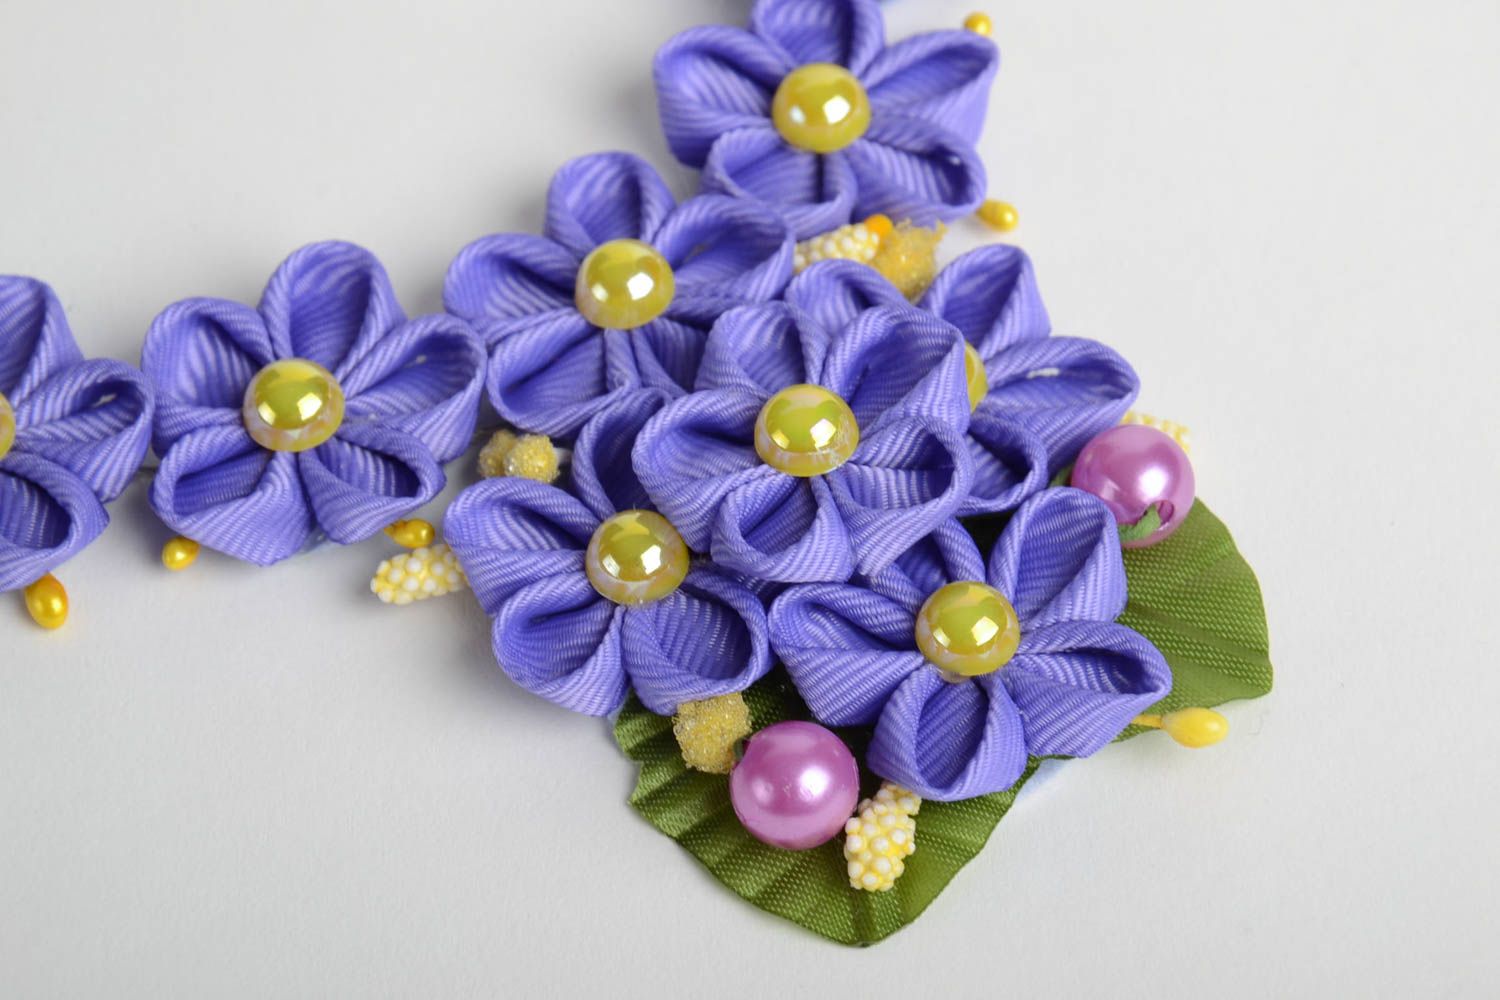 Handmade designer necklace with violet rep ribbon kanzashi flowers and beads photo 3